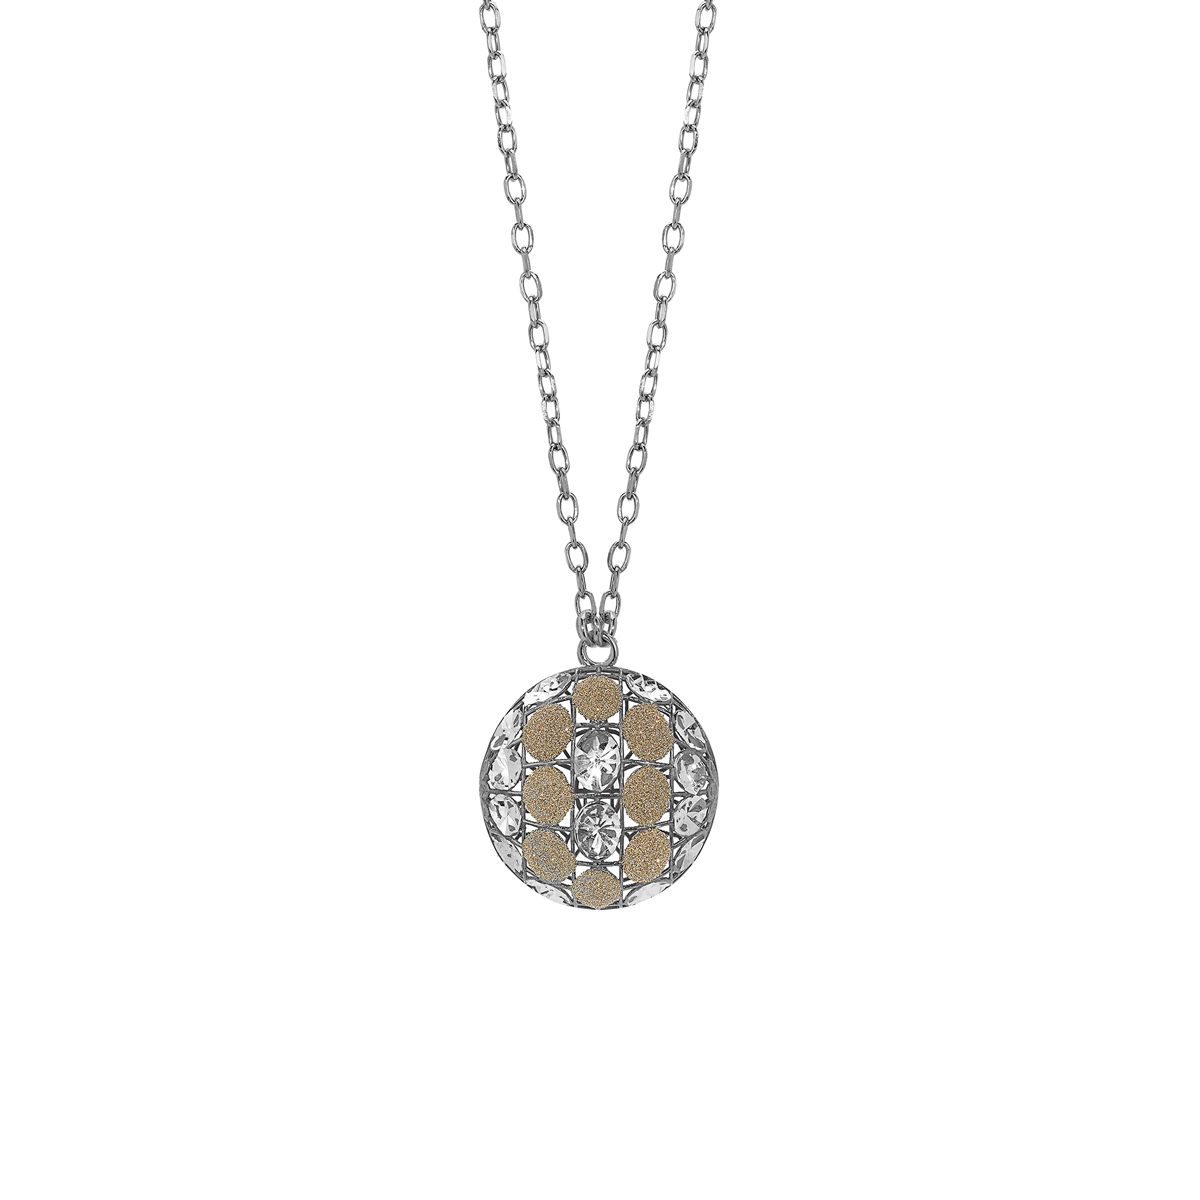 Diamond Effect Rhodium-Plated Silver Necklace